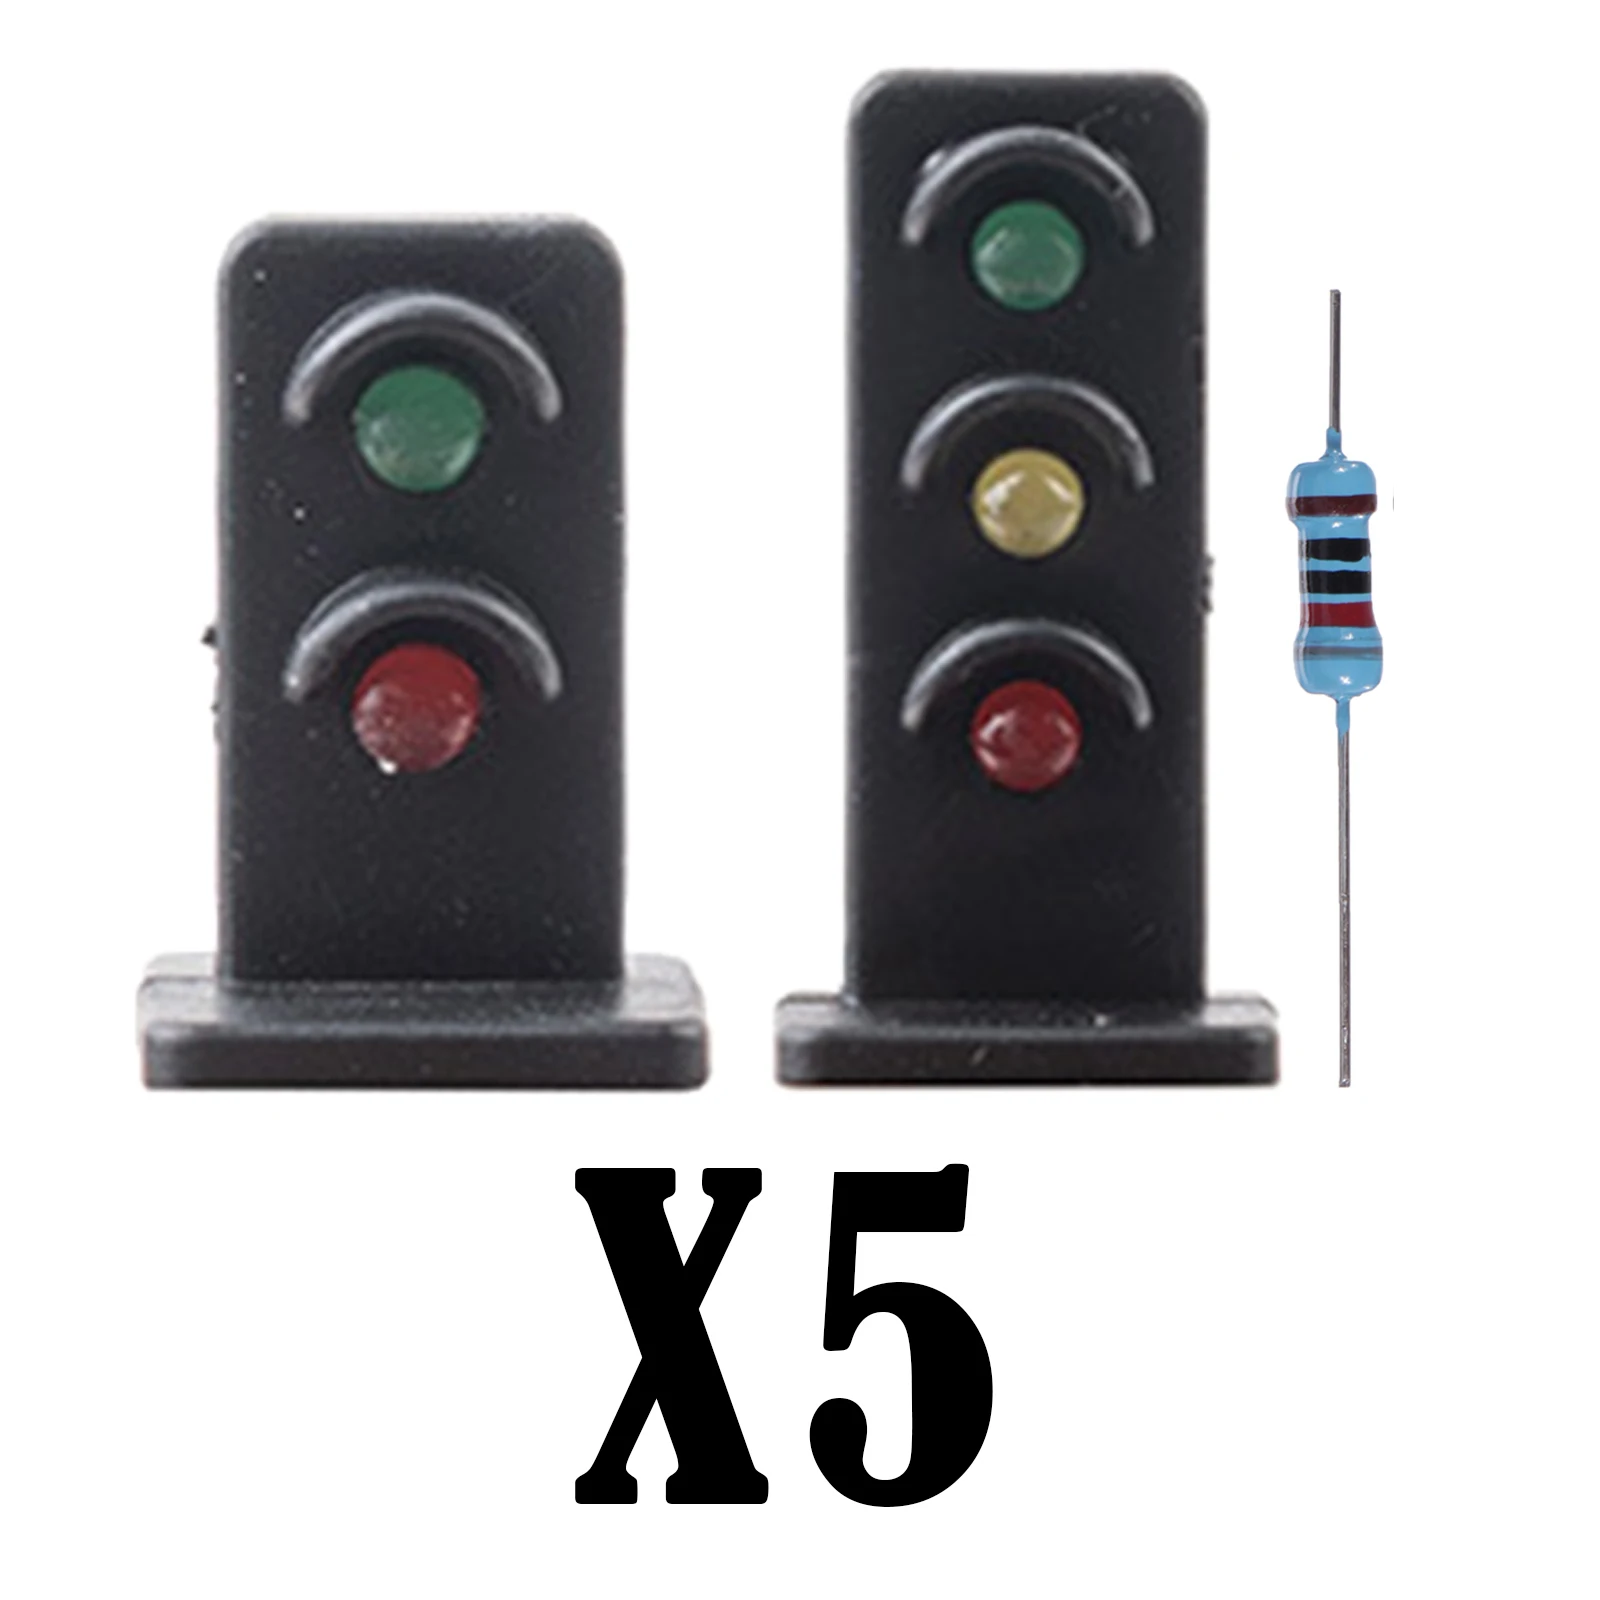 Pack of 5 Diorama 1:87 HO Scale Traffic Light Lamp Miniature Sand Table Micro Landscape Building Railway Model Scenery Supplies